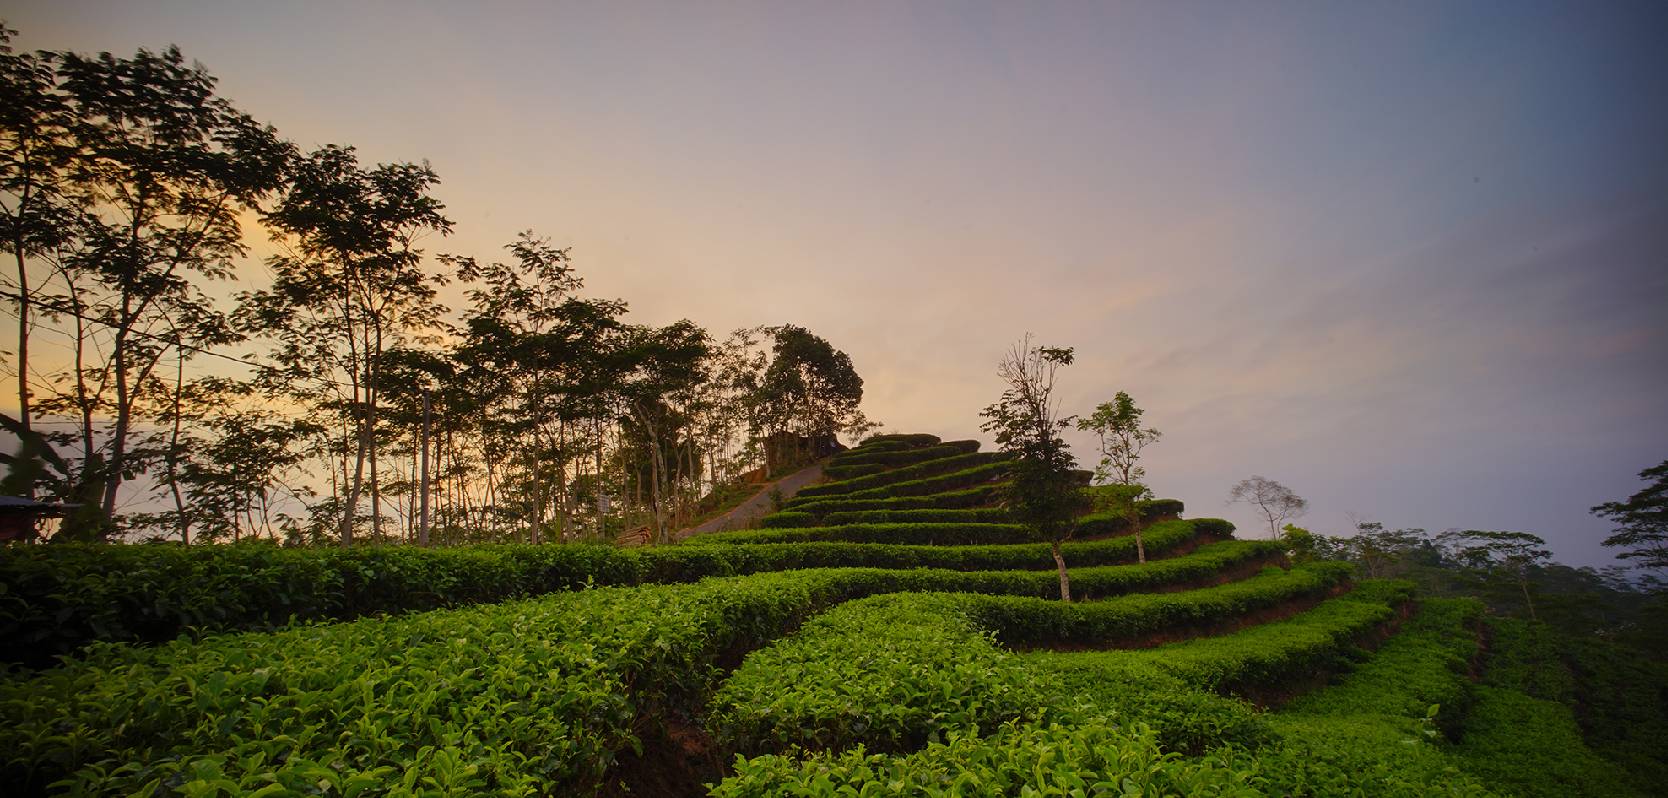 Cultivating Excellence The Art and Science of Tea Plantation Farming